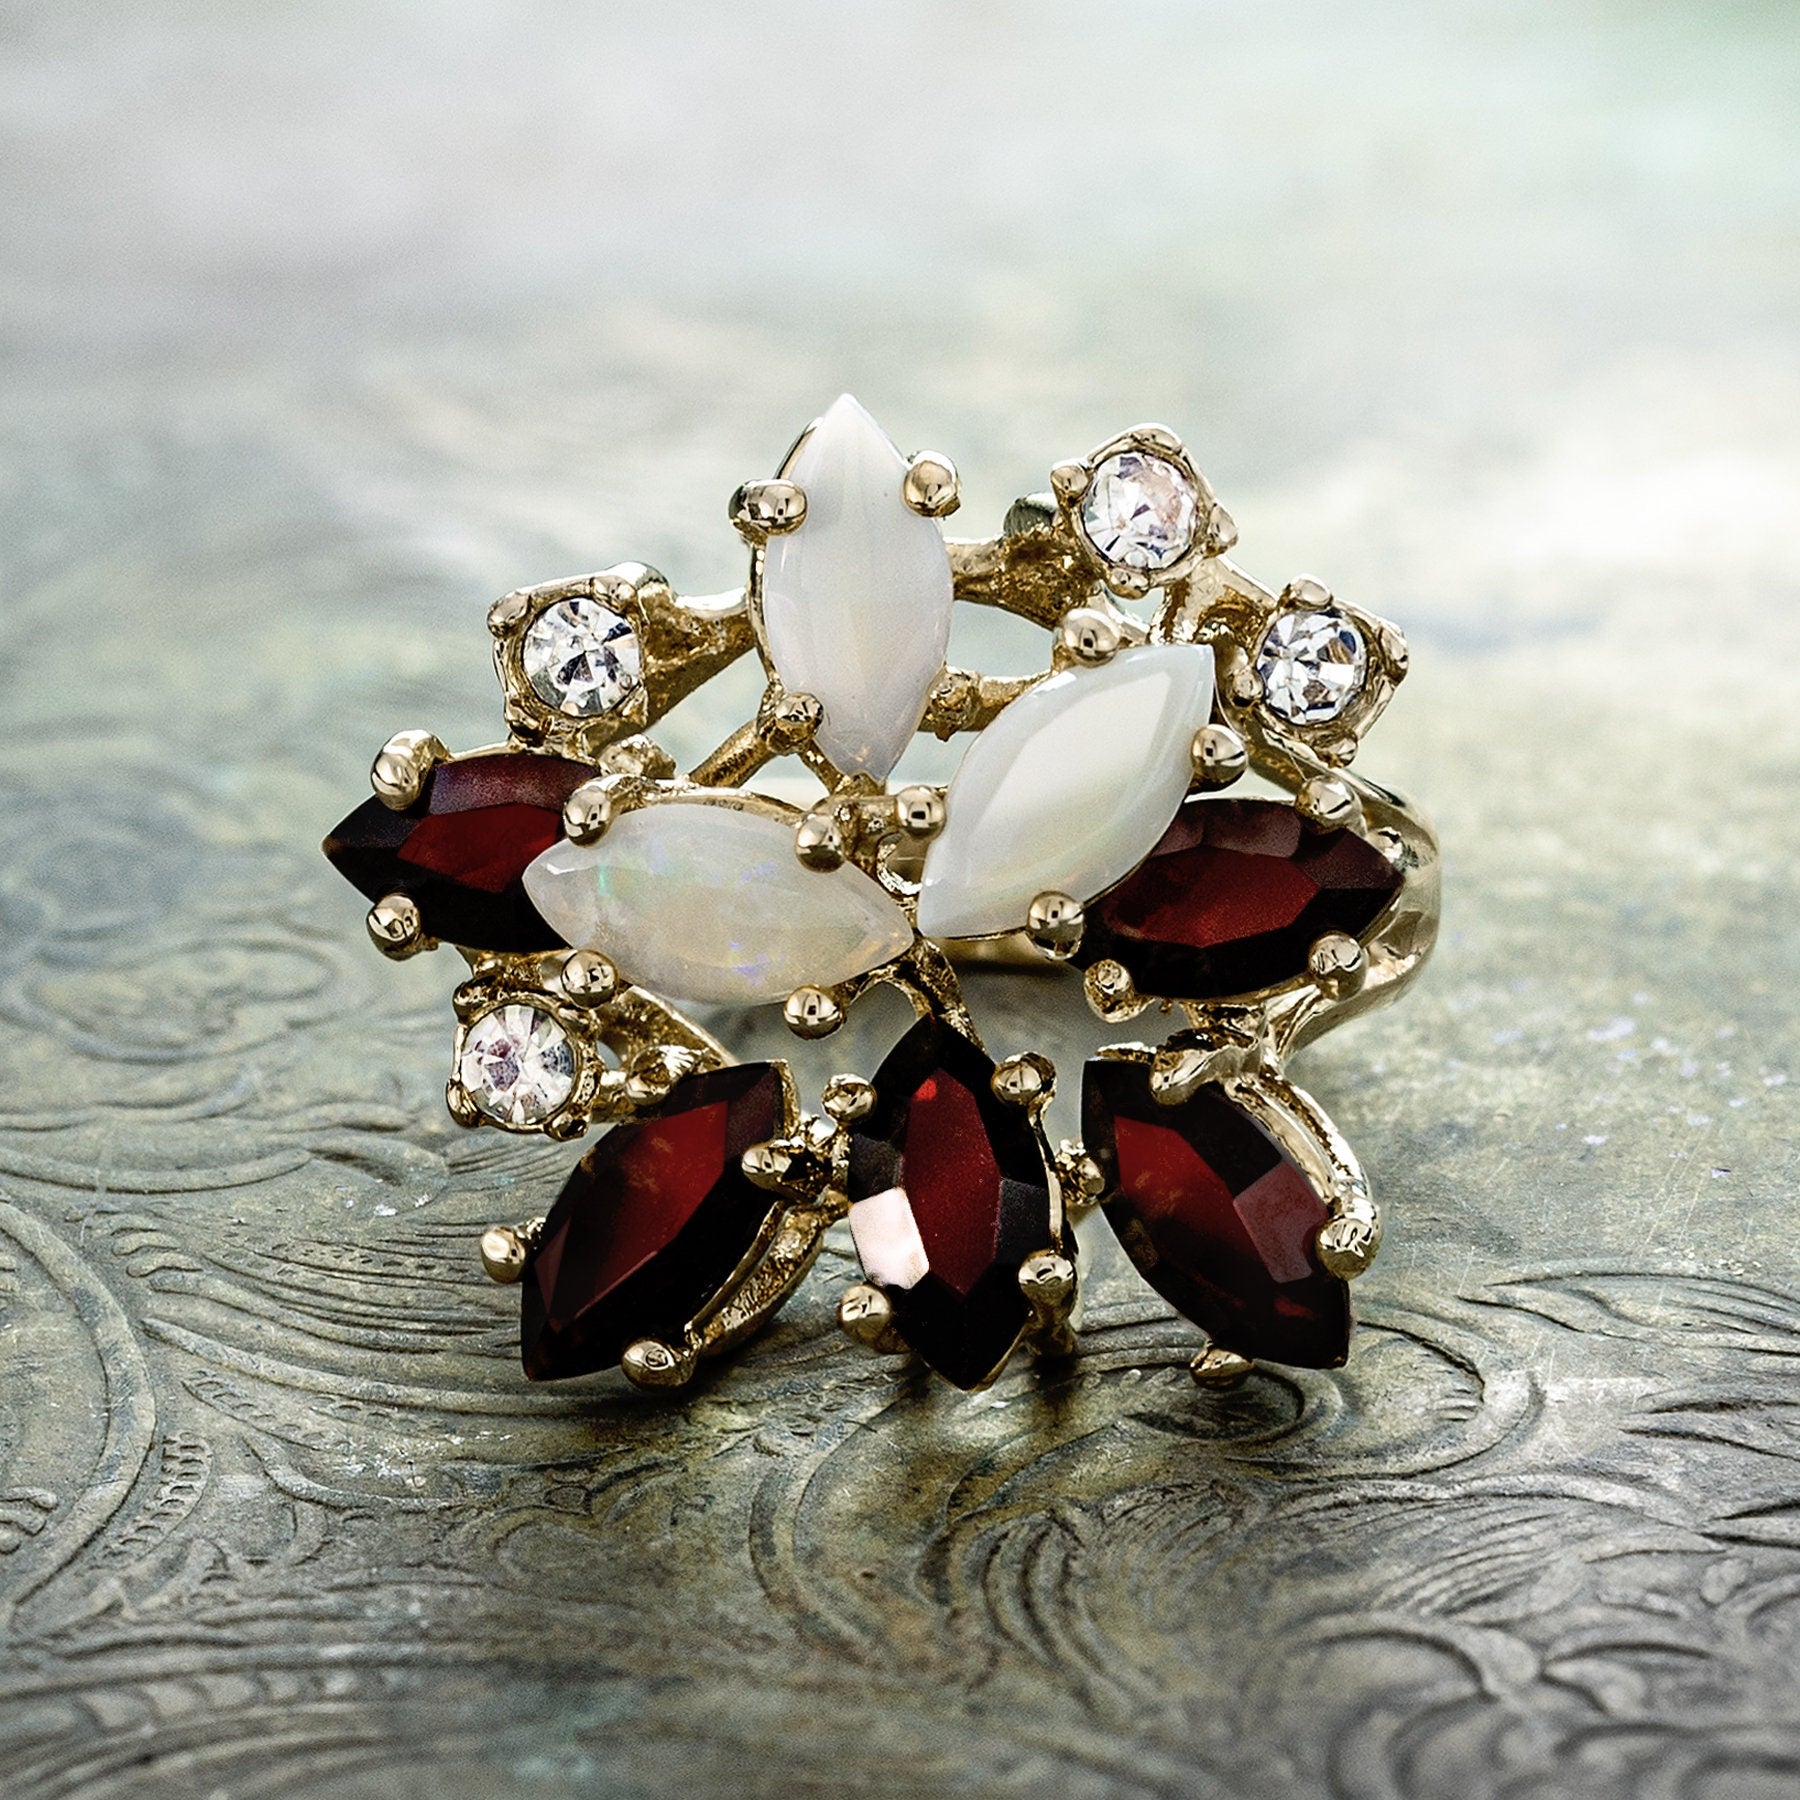 Vintage Ring Genuine Opals Cluster with Garnet and Clear Swarovski Crystals Womans Ring 18k Gold Antique  #R213